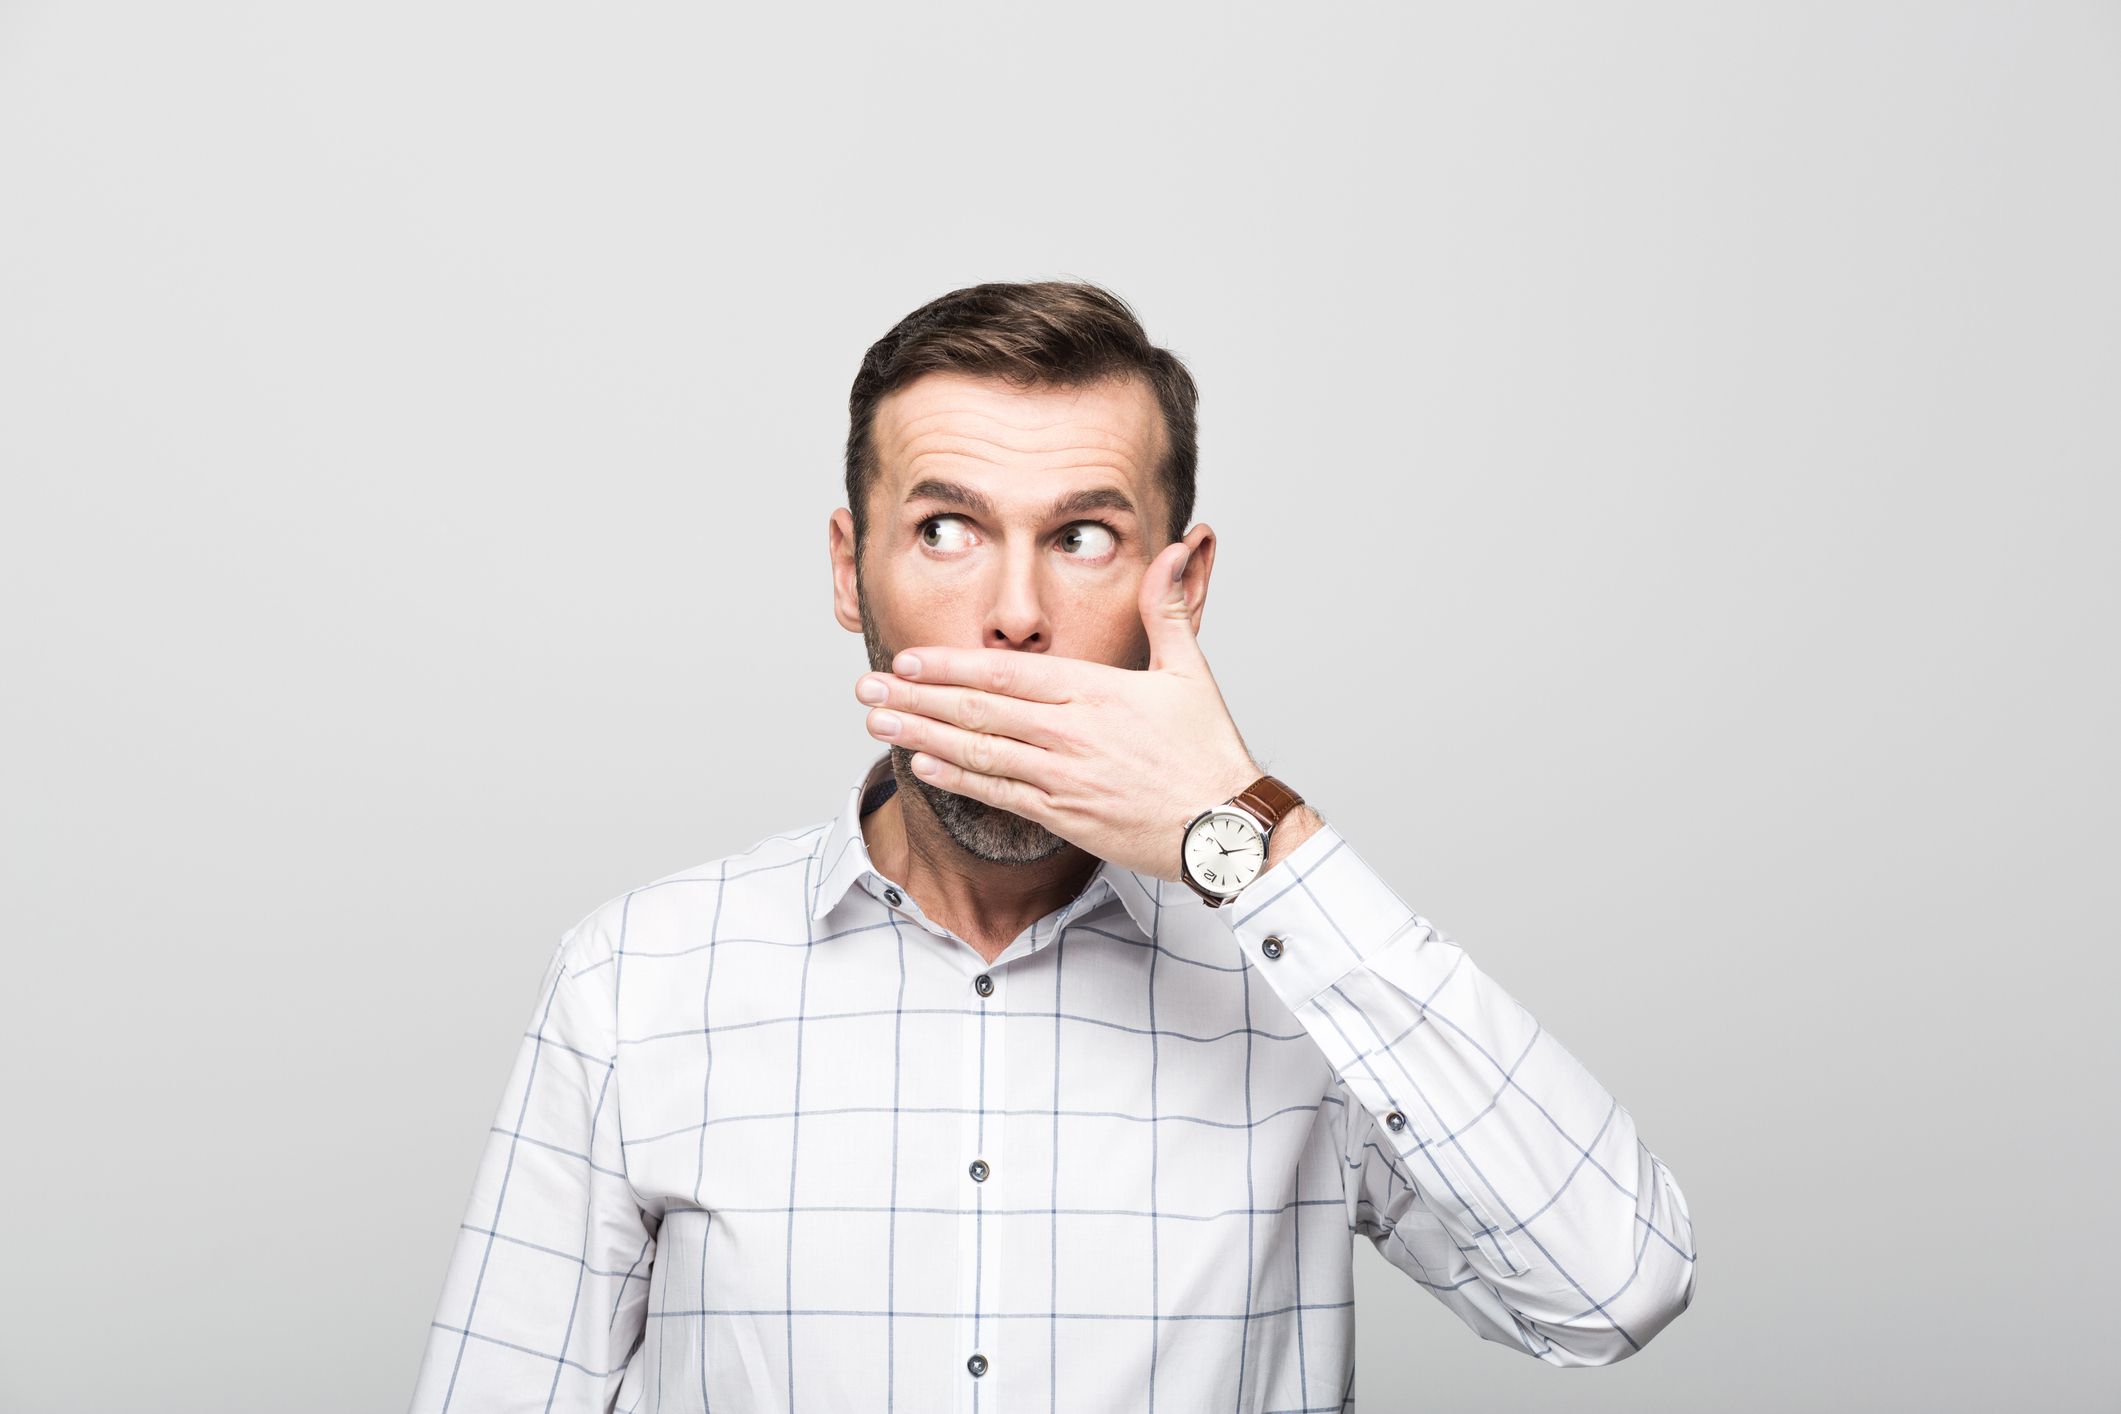 What causes halitosis?